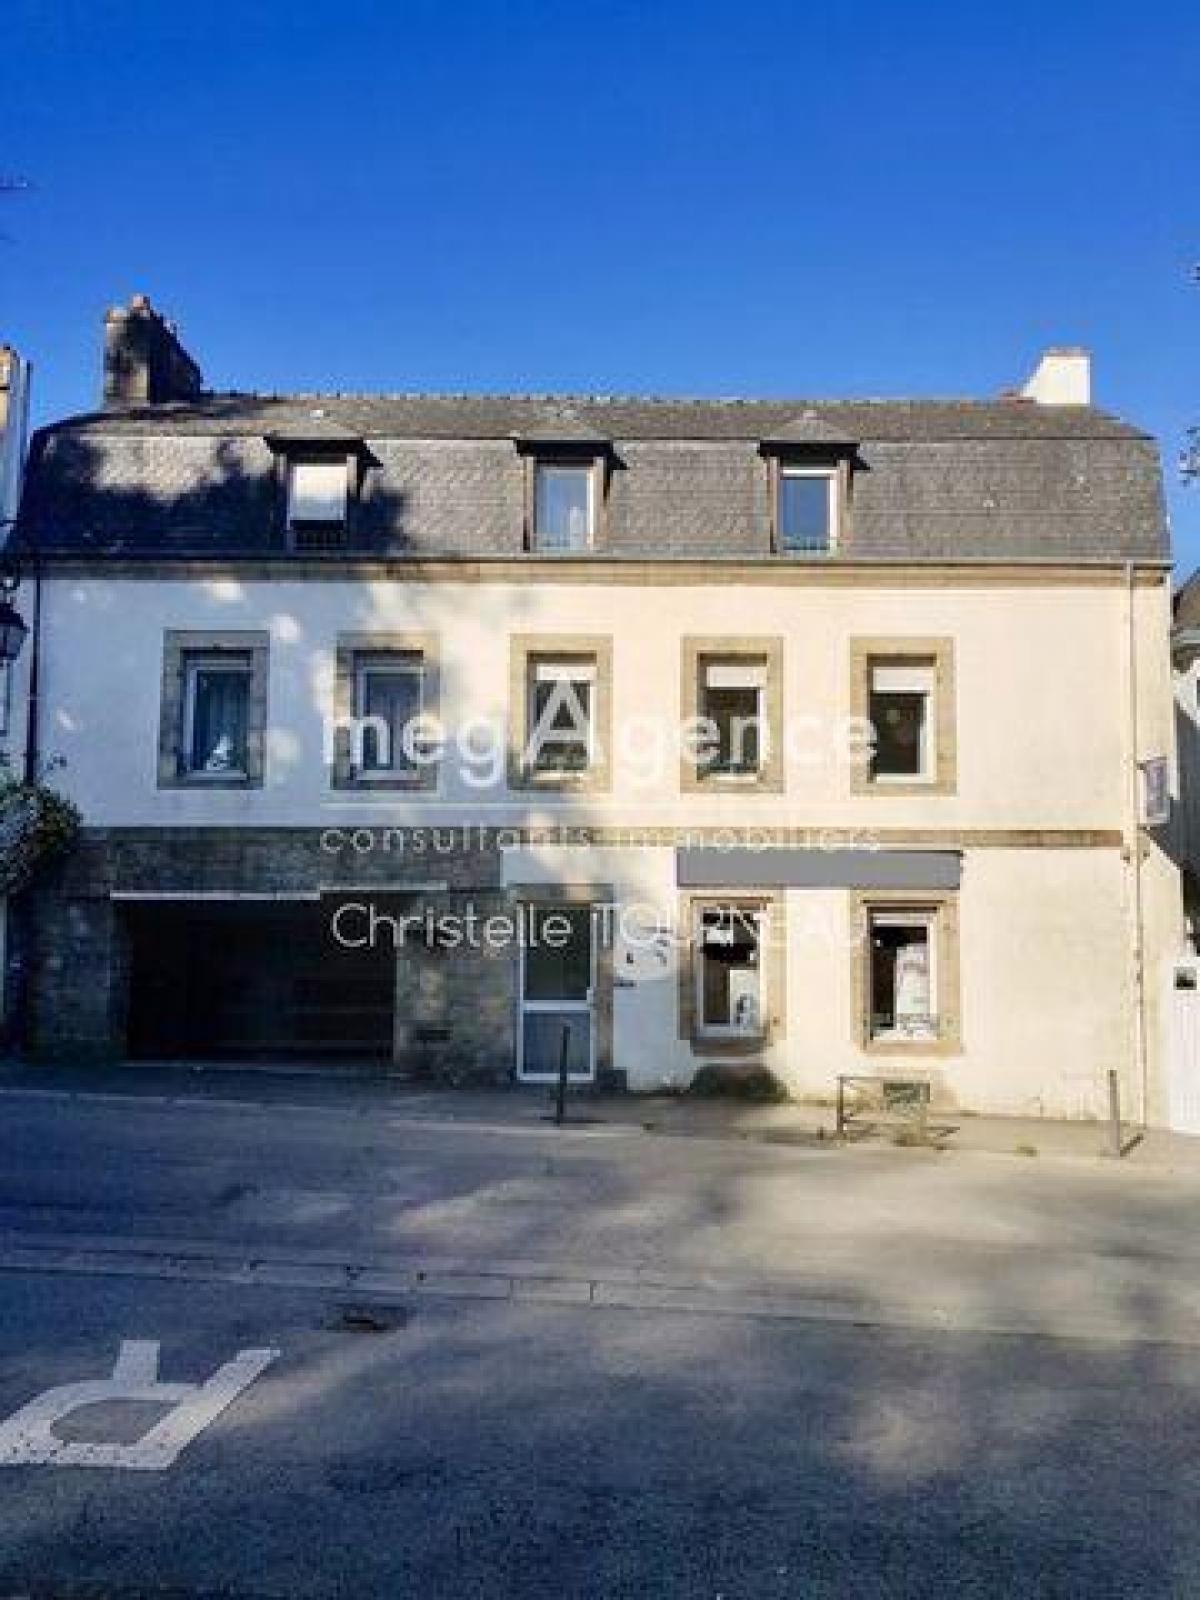 Picture of Office For Sale in Auray, Bretagne, France